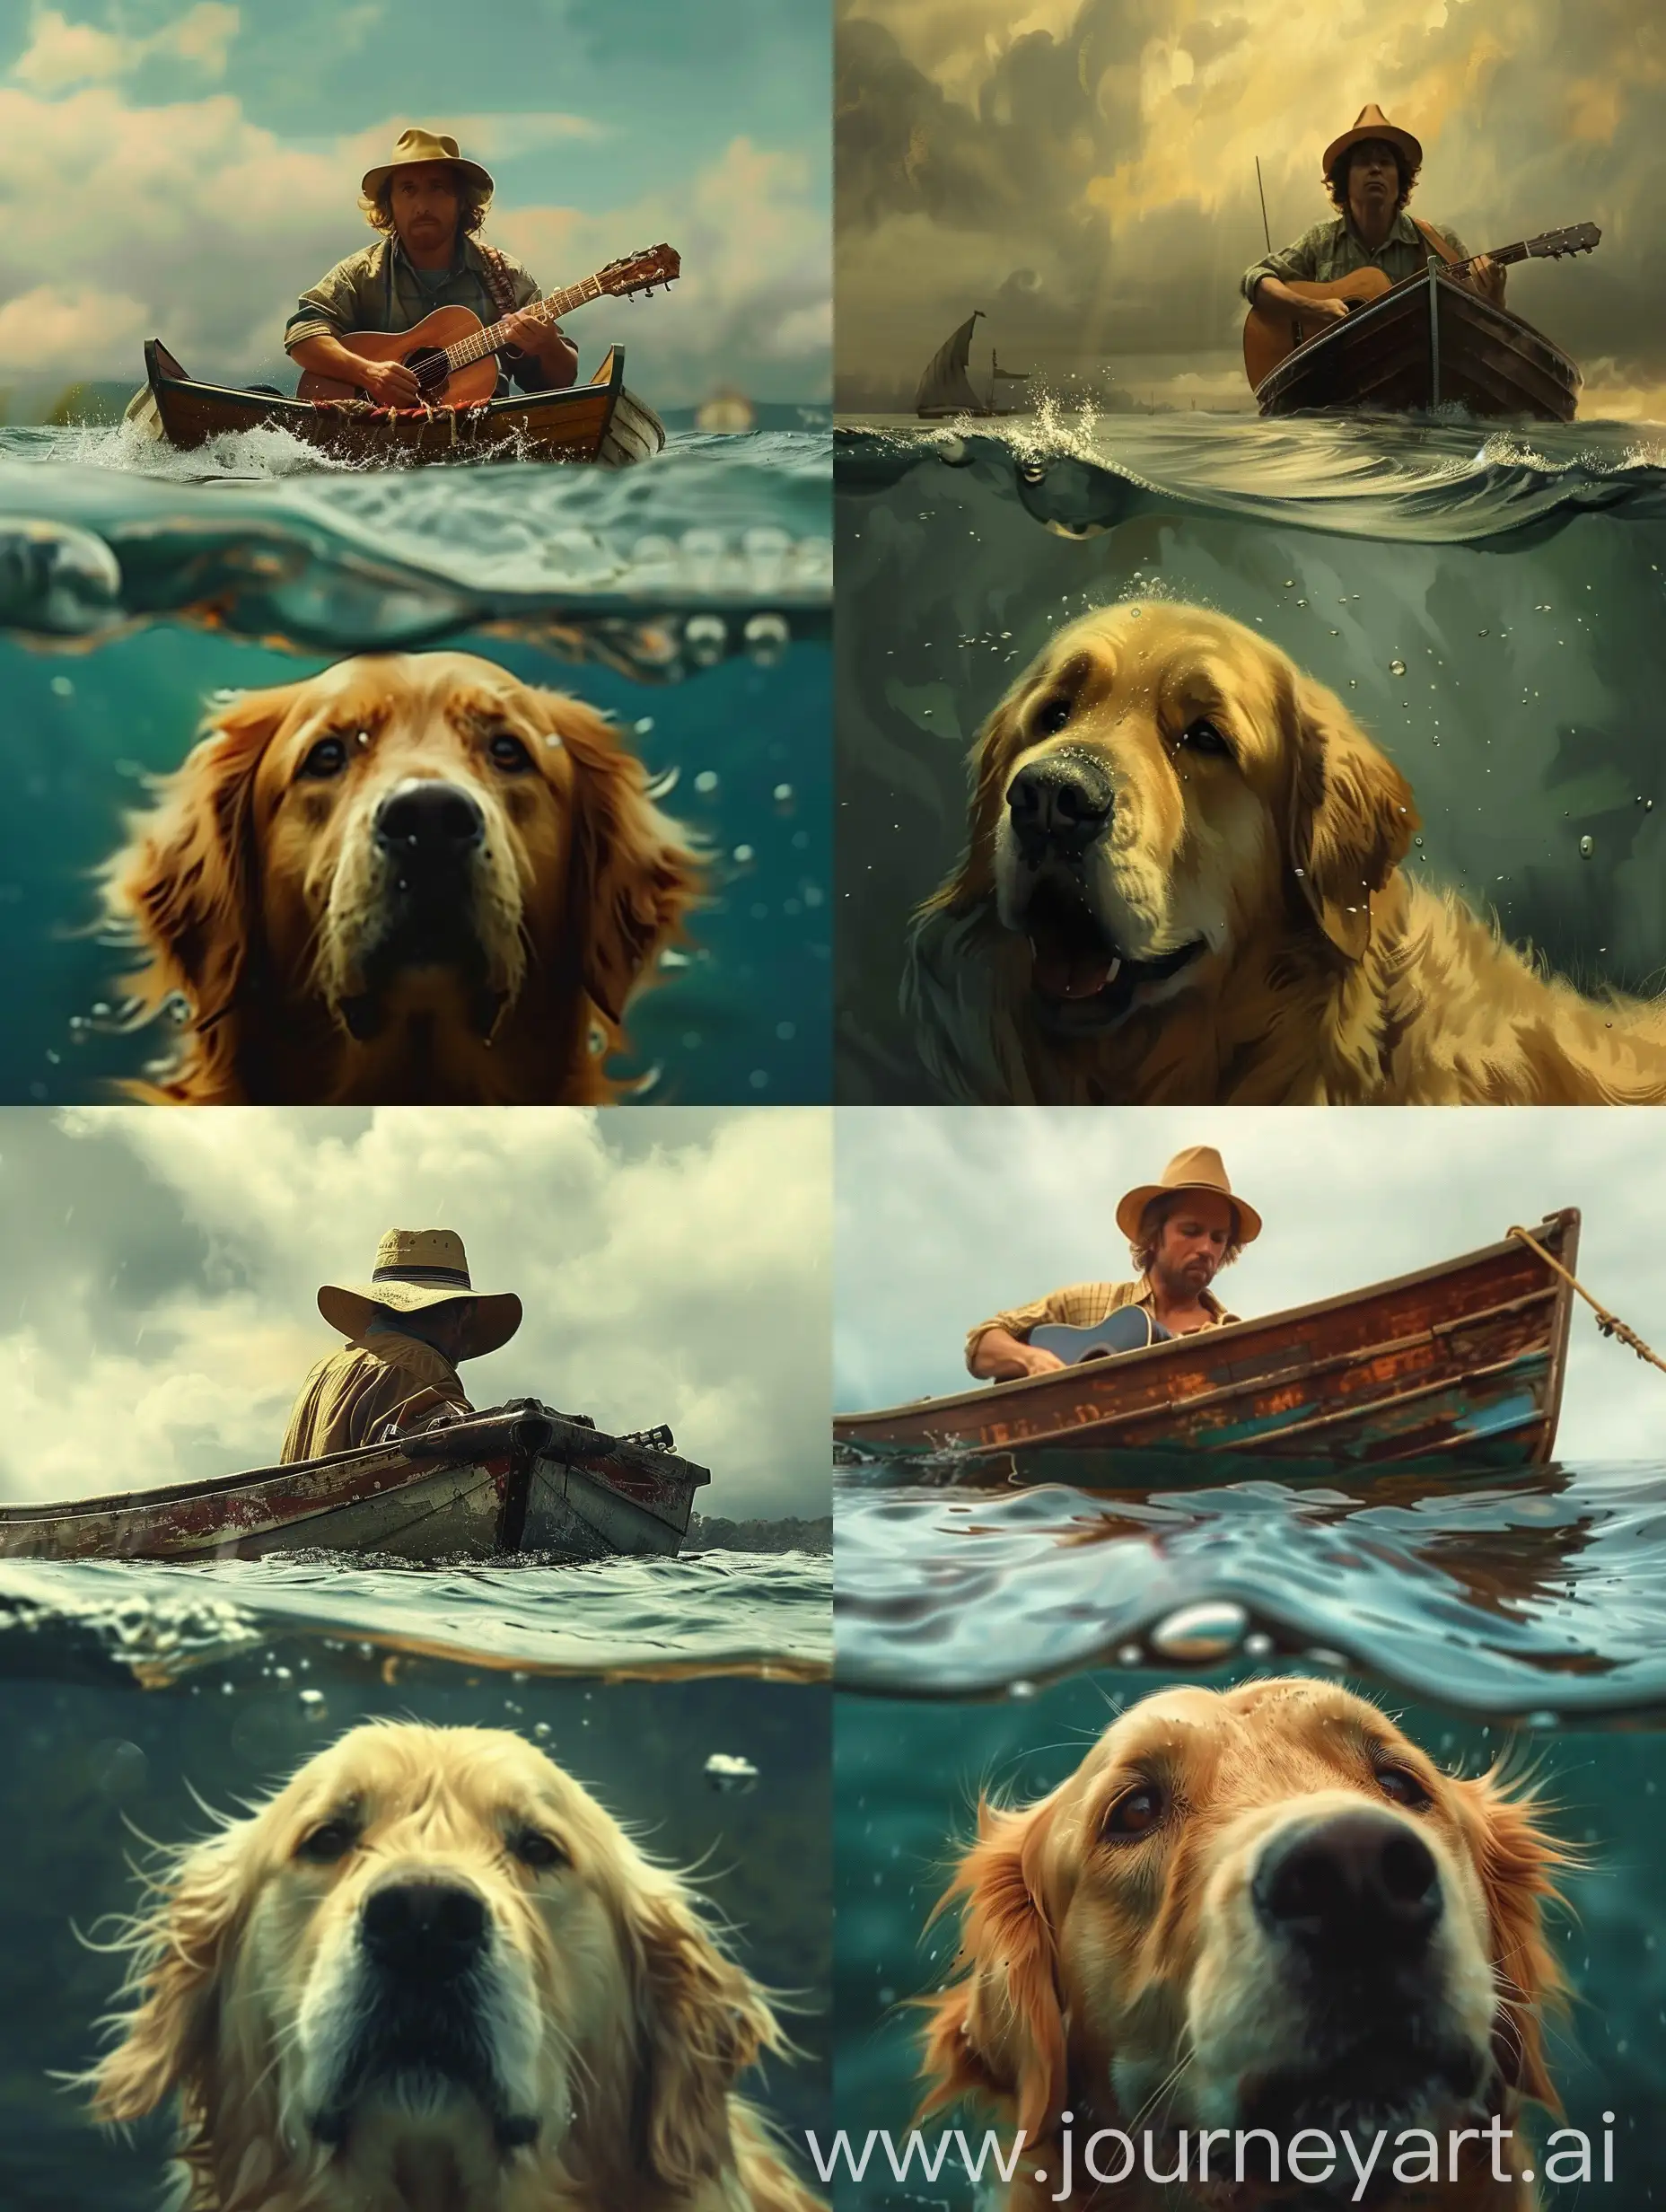 a worm's eyeview from the water surface level looking at the back side view of a man in a boat playing a guitar with a golden retriever looking down at the viewer